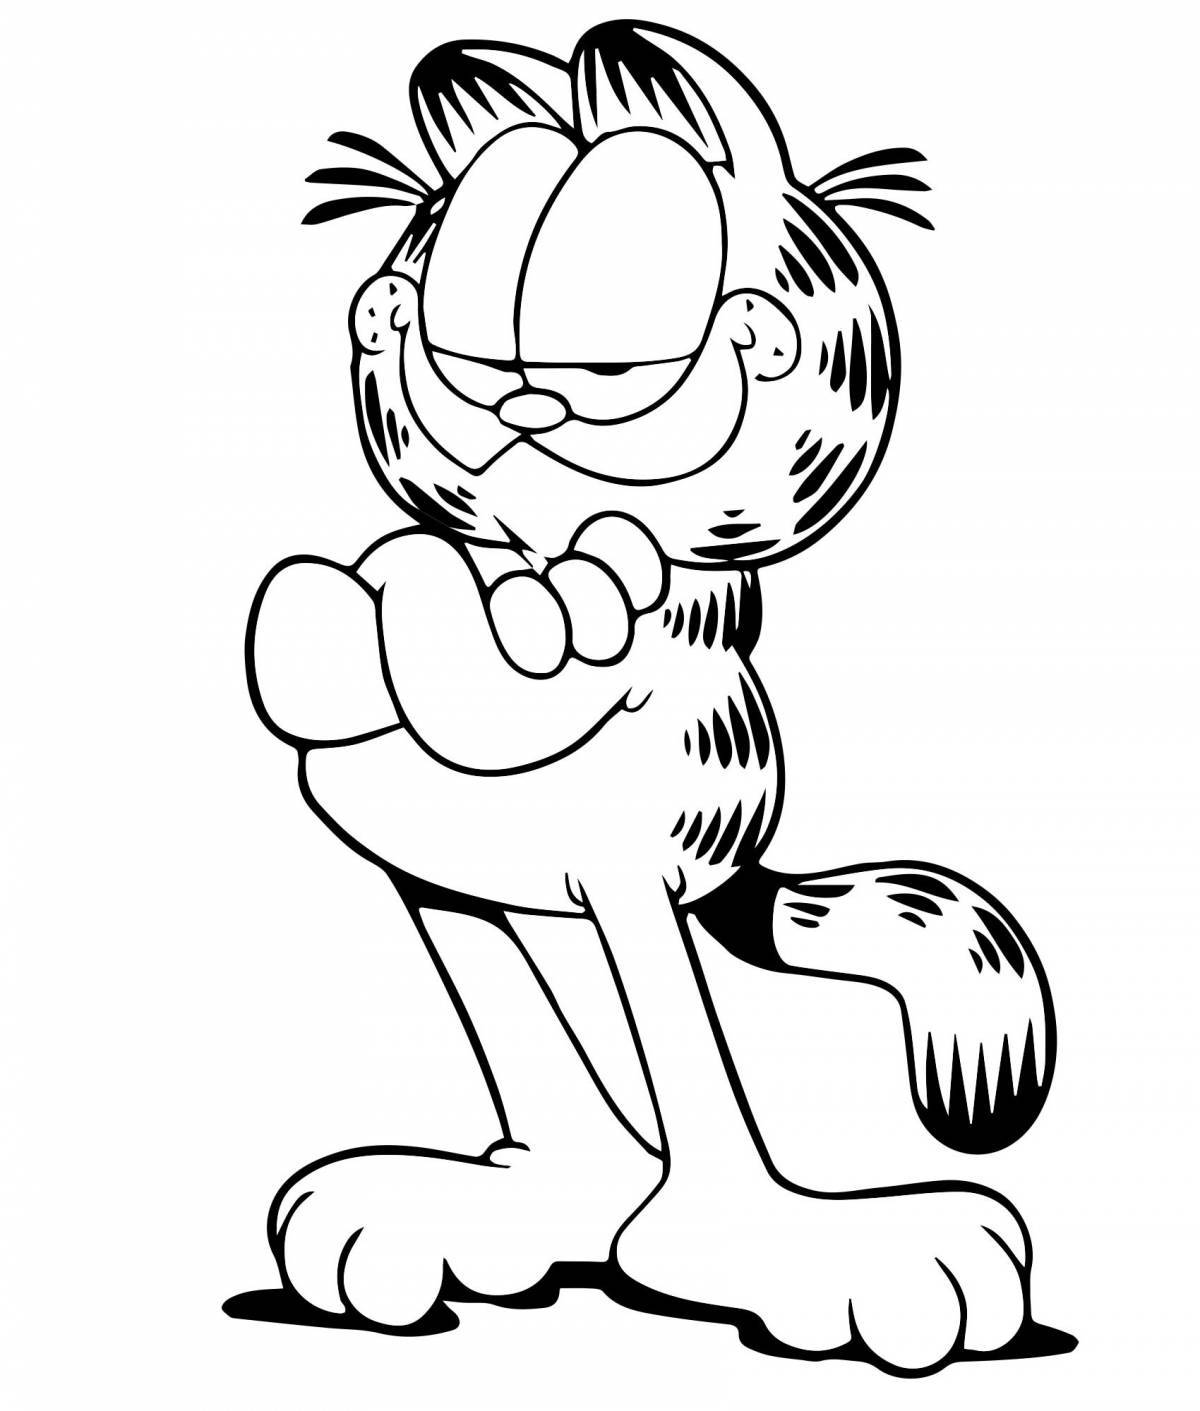 Glitter Garfield coloring page